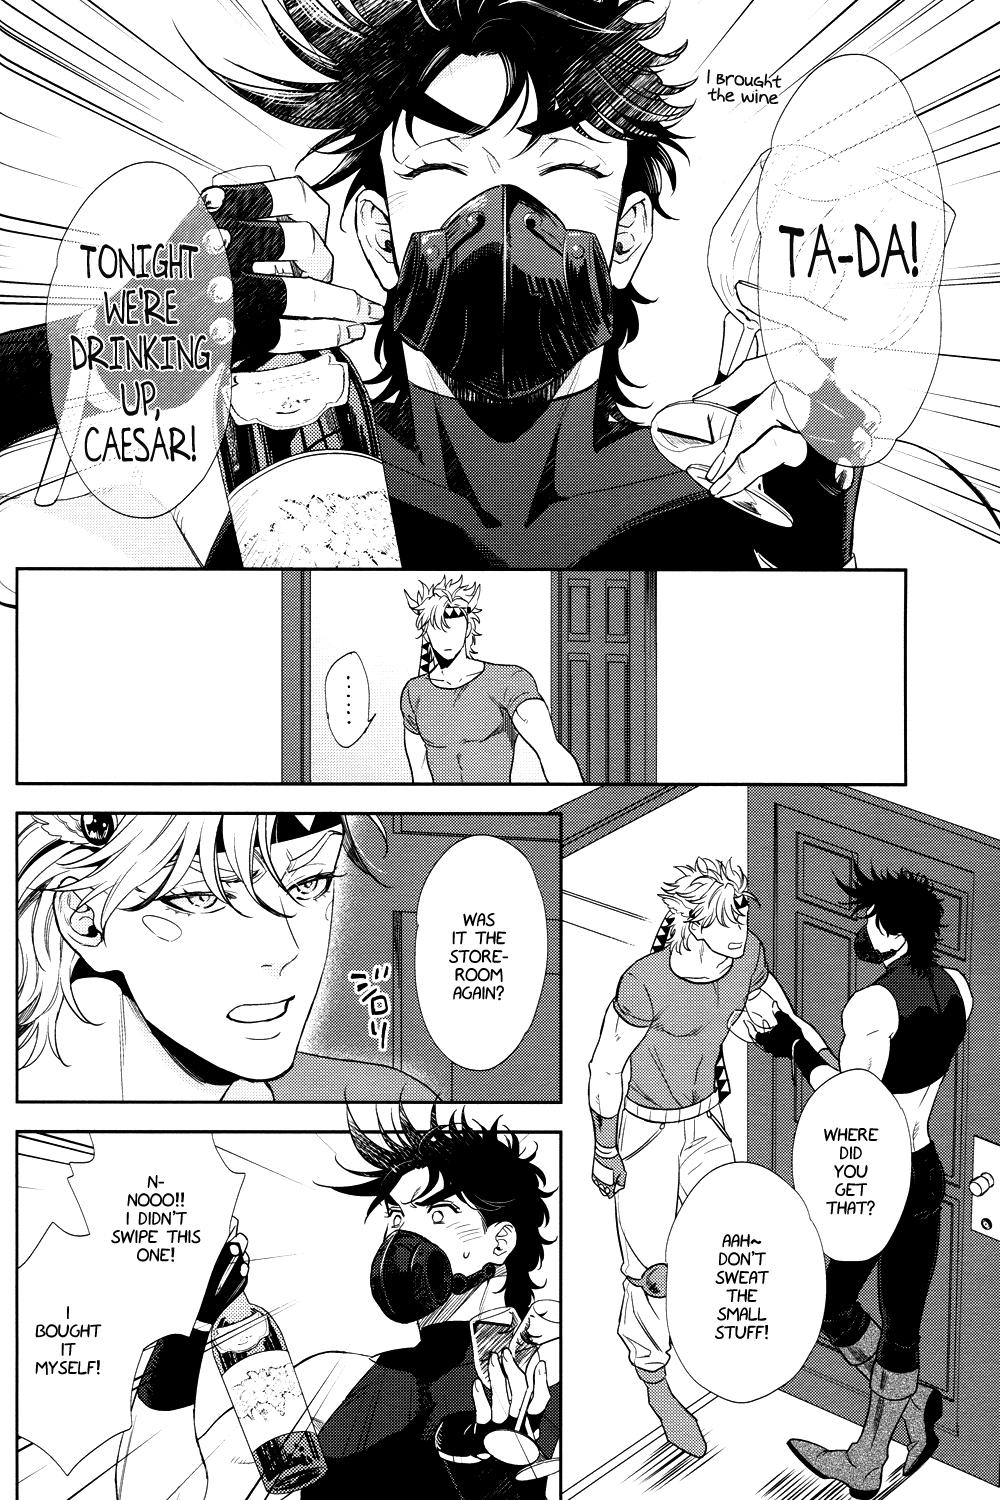 Hot The Boy in the Other Room - Jojos bizarre adventure Transex - Page 8